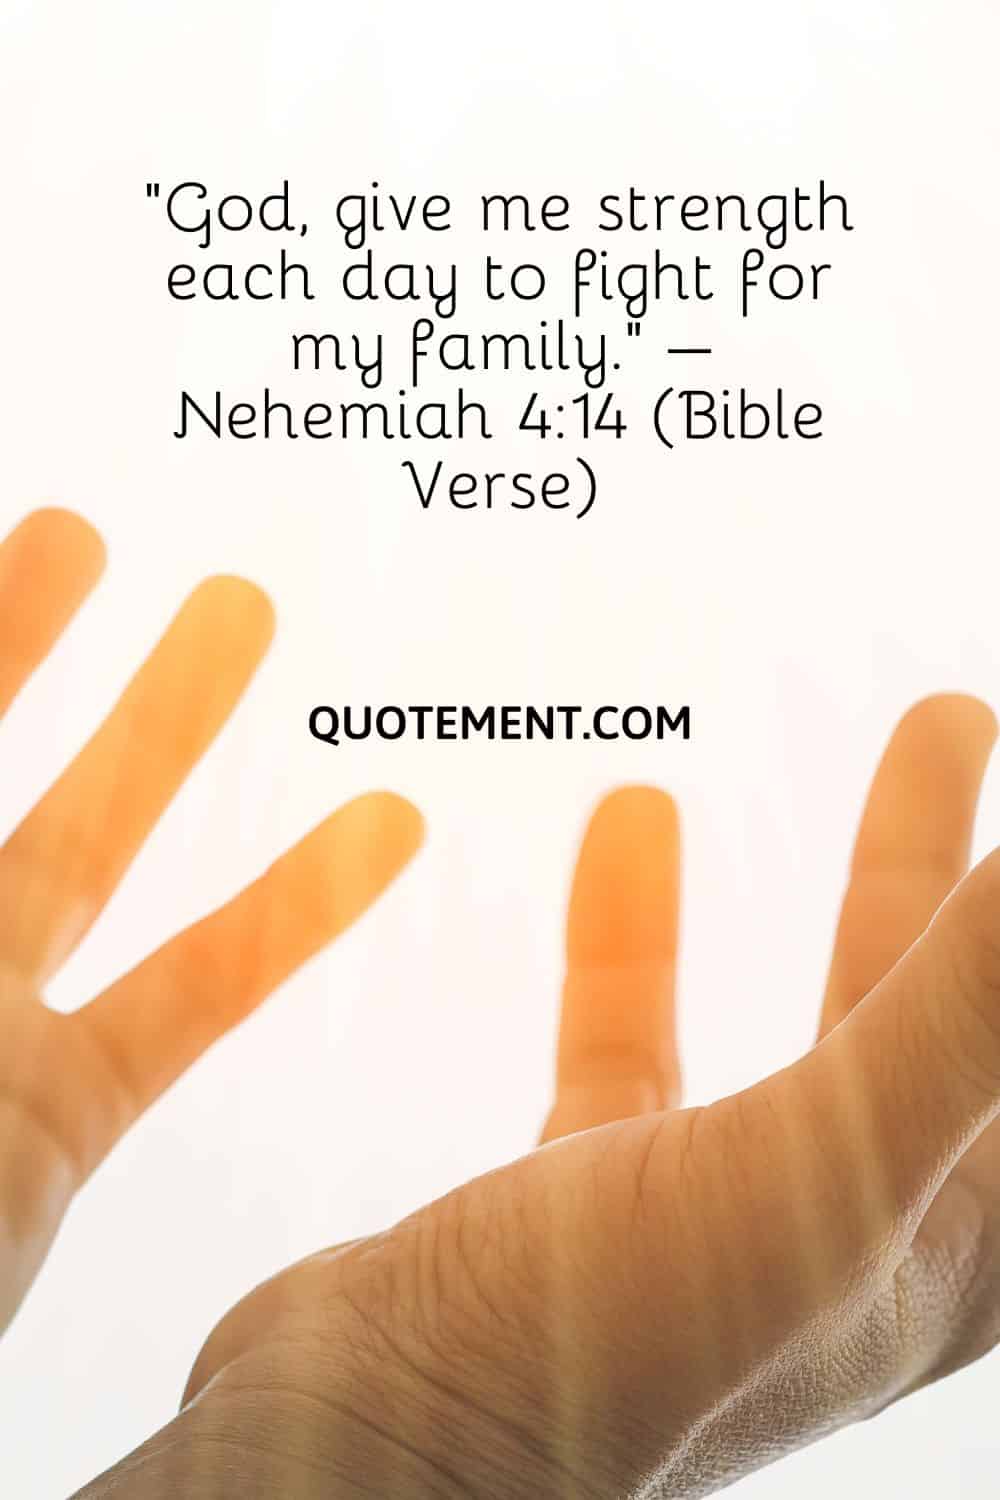 “God, give me strength each day to fight for my family.” – Nehemiah 414 (Bible Verse)